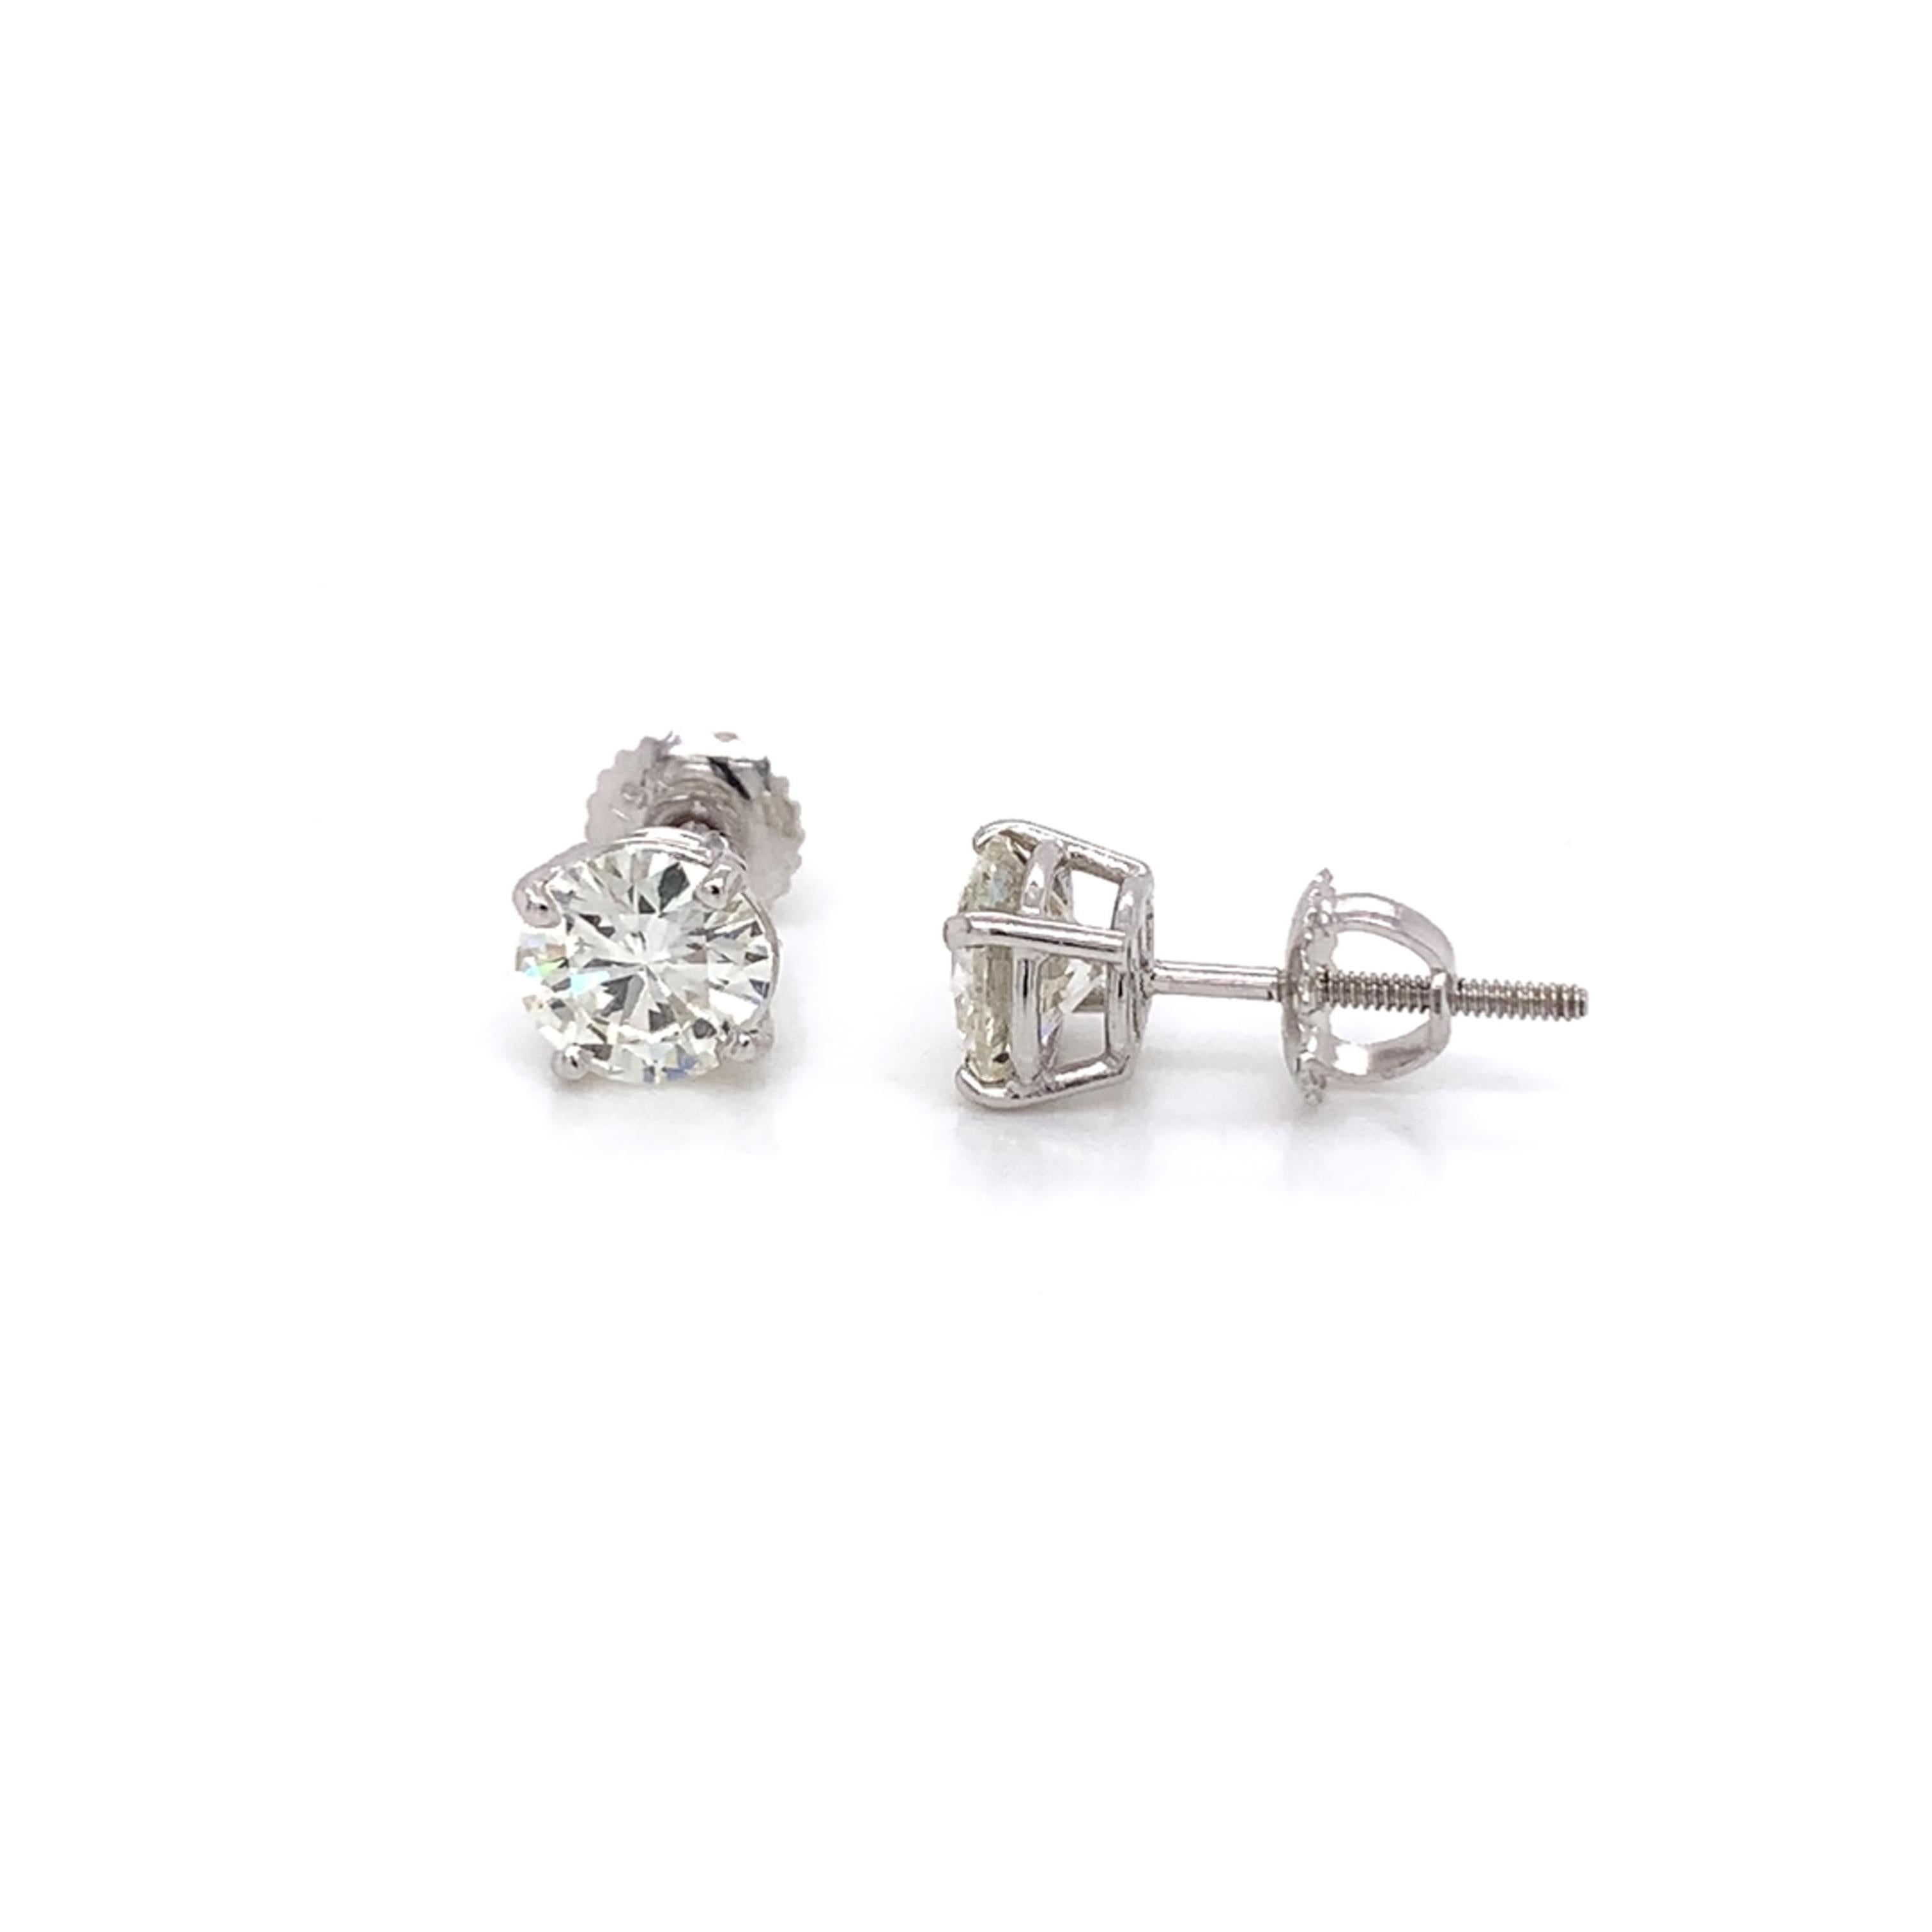 Diamond Stud Earrings made with real/natural brilliant cut diamonds. Total Diamond Weight: 2.02cts. Diamond Quantity: 2 round diamonds. Color: J-K. Clarity: VS. Mounted on 18 karat white gold screw back setting.